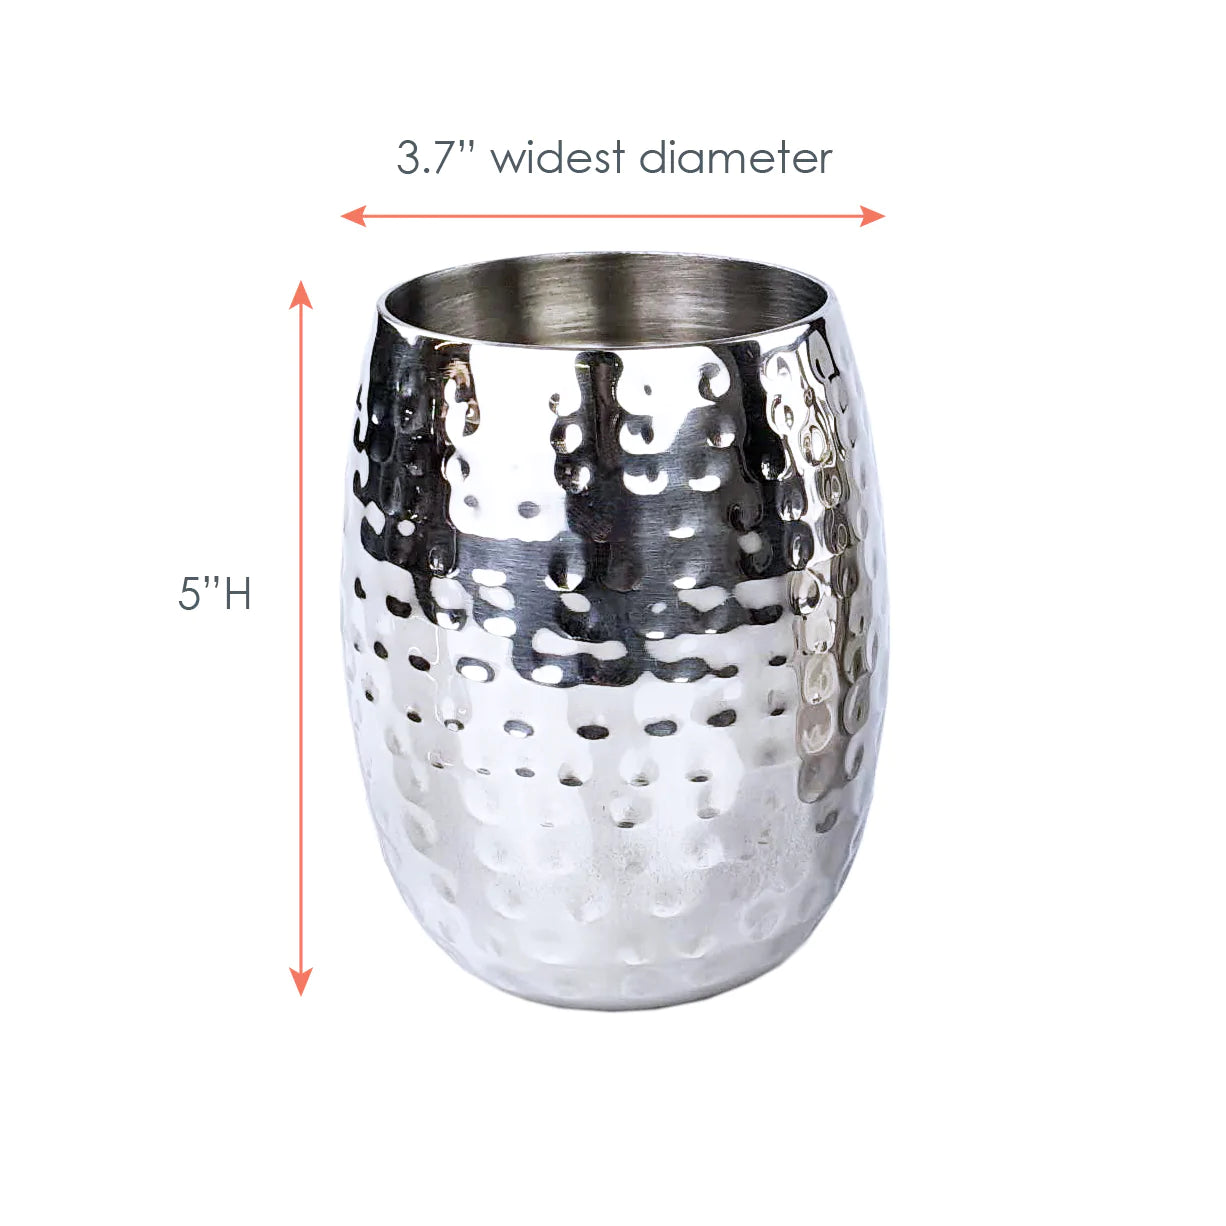 Large cocktail tumbler cup made of stainless steel.  Double wall insulated for the coldest drinks indoors or outdoors.  